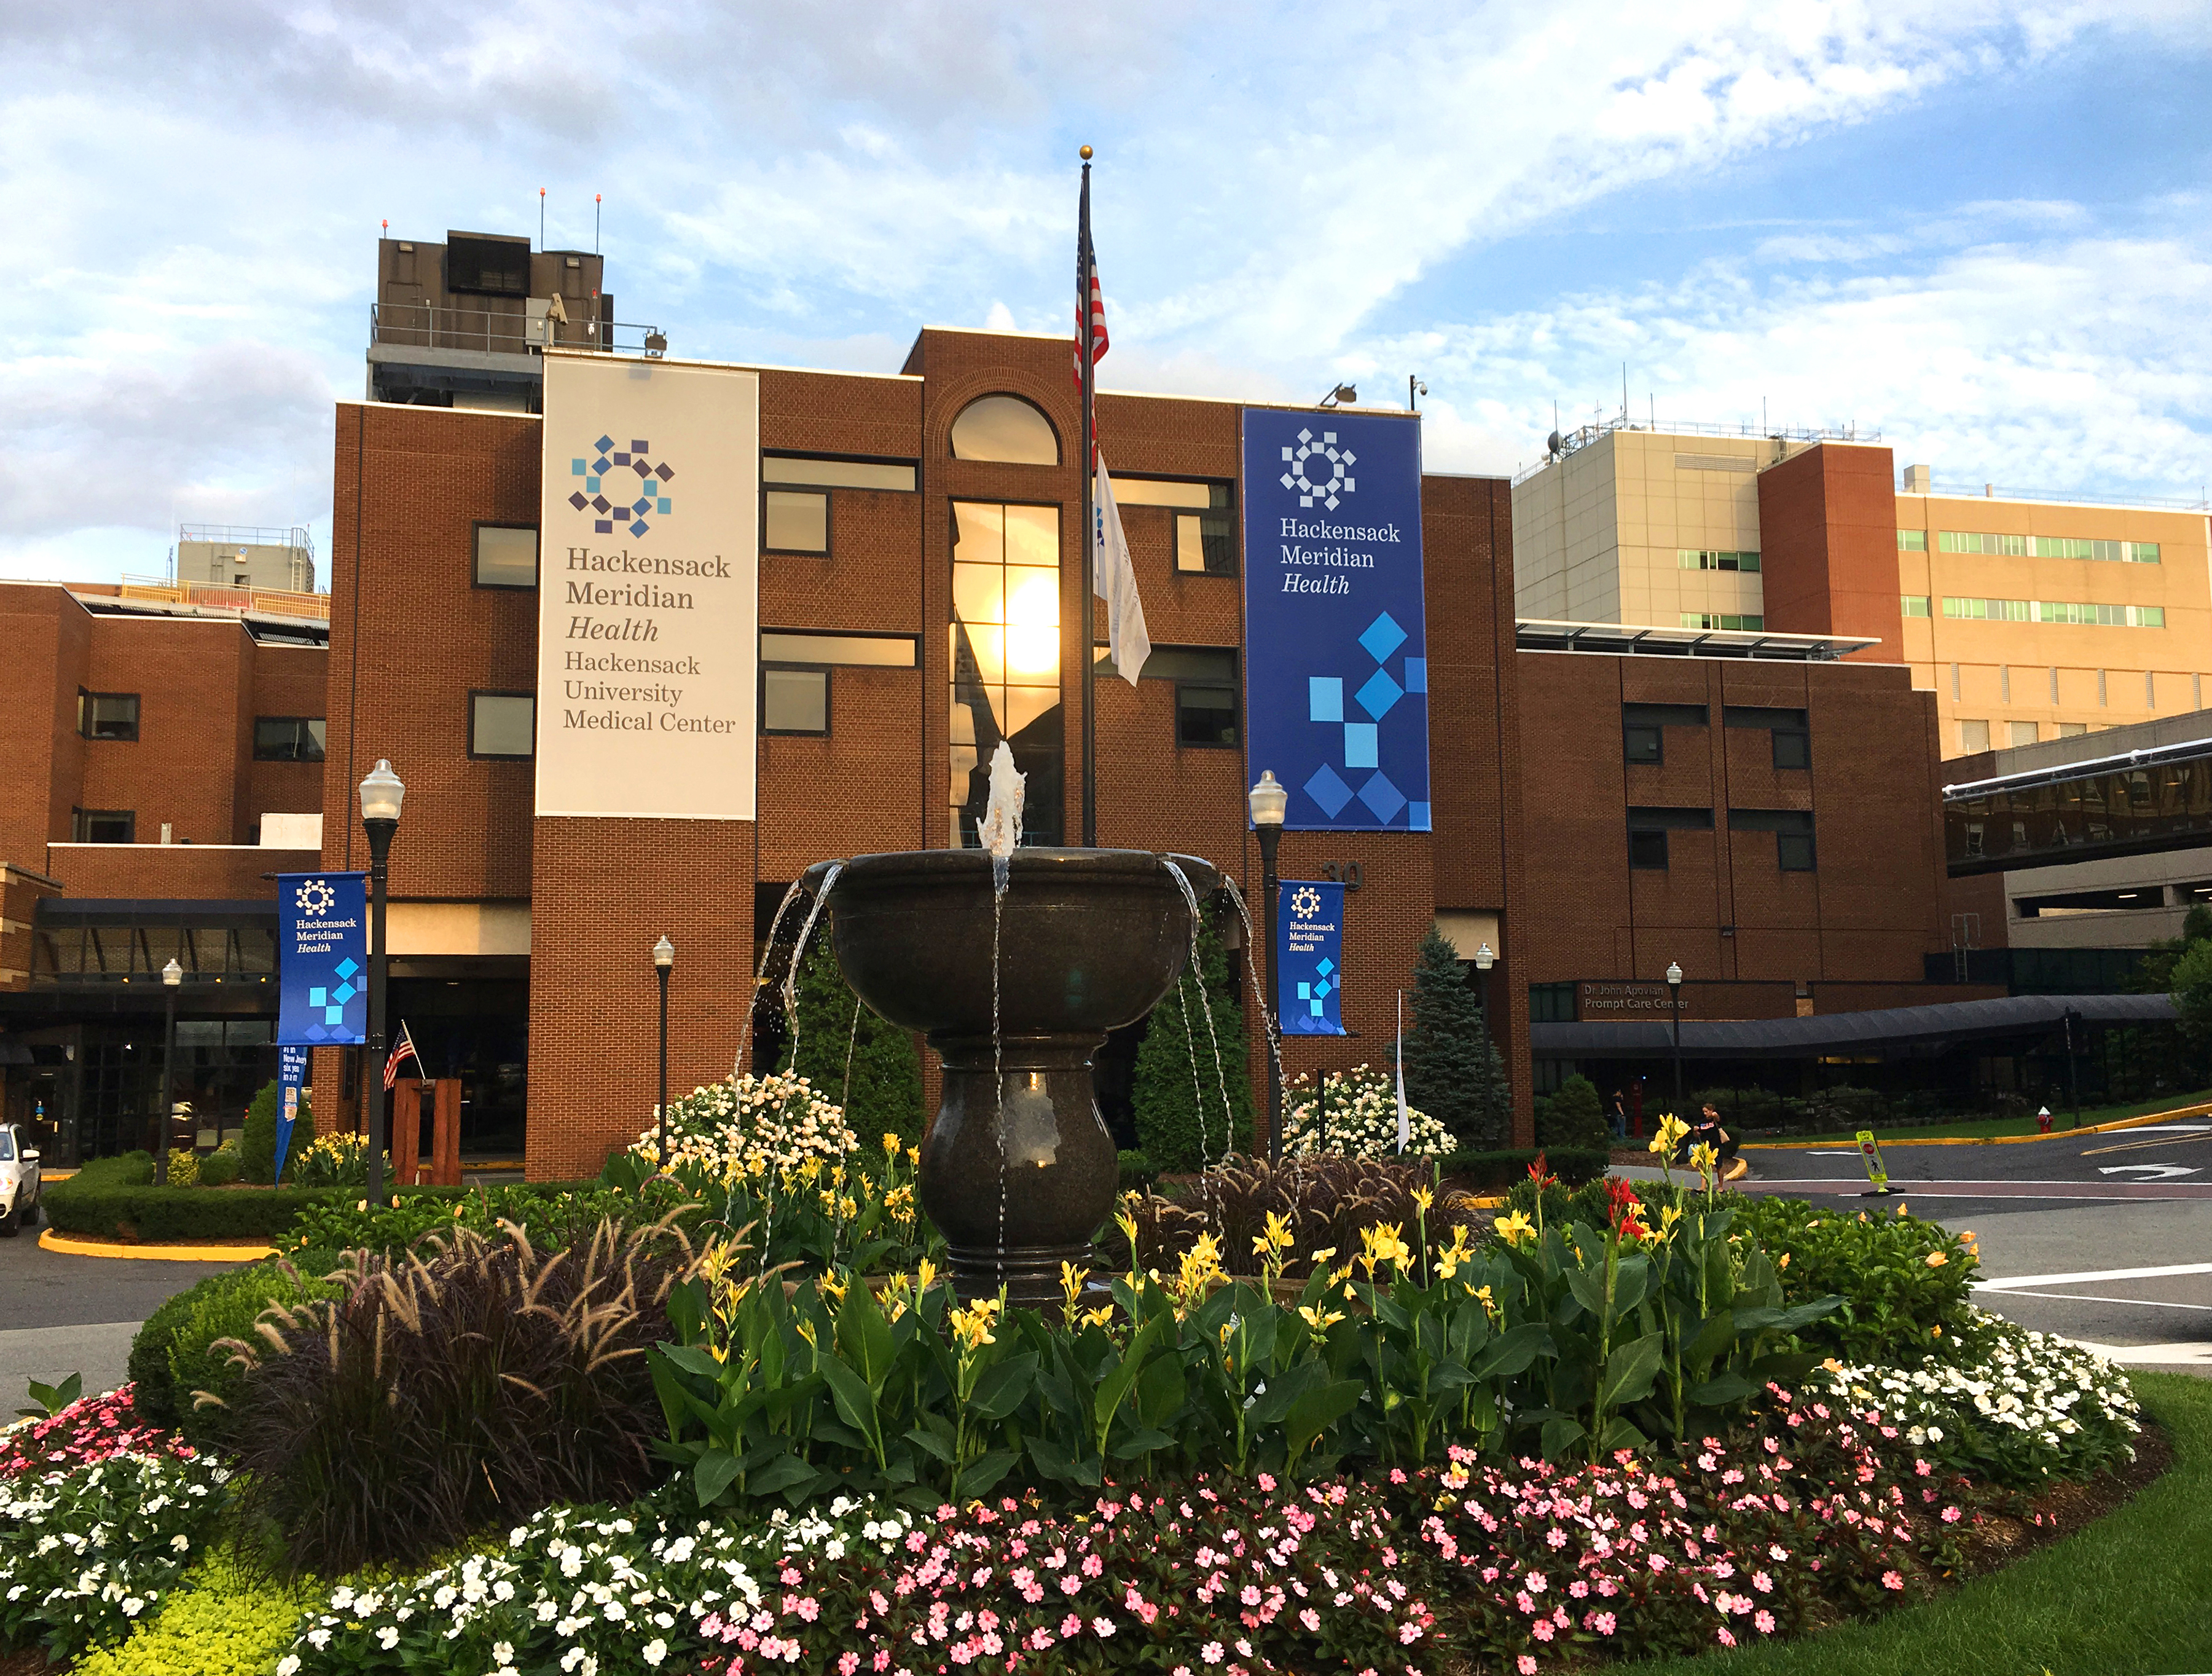 Newswise: Hackensack University Medical Center Recognized by Practice Greenhealth as One of the Top 25 Hospitals in the U.S. for Environmental Sustainability for the 7th Consecutive Year